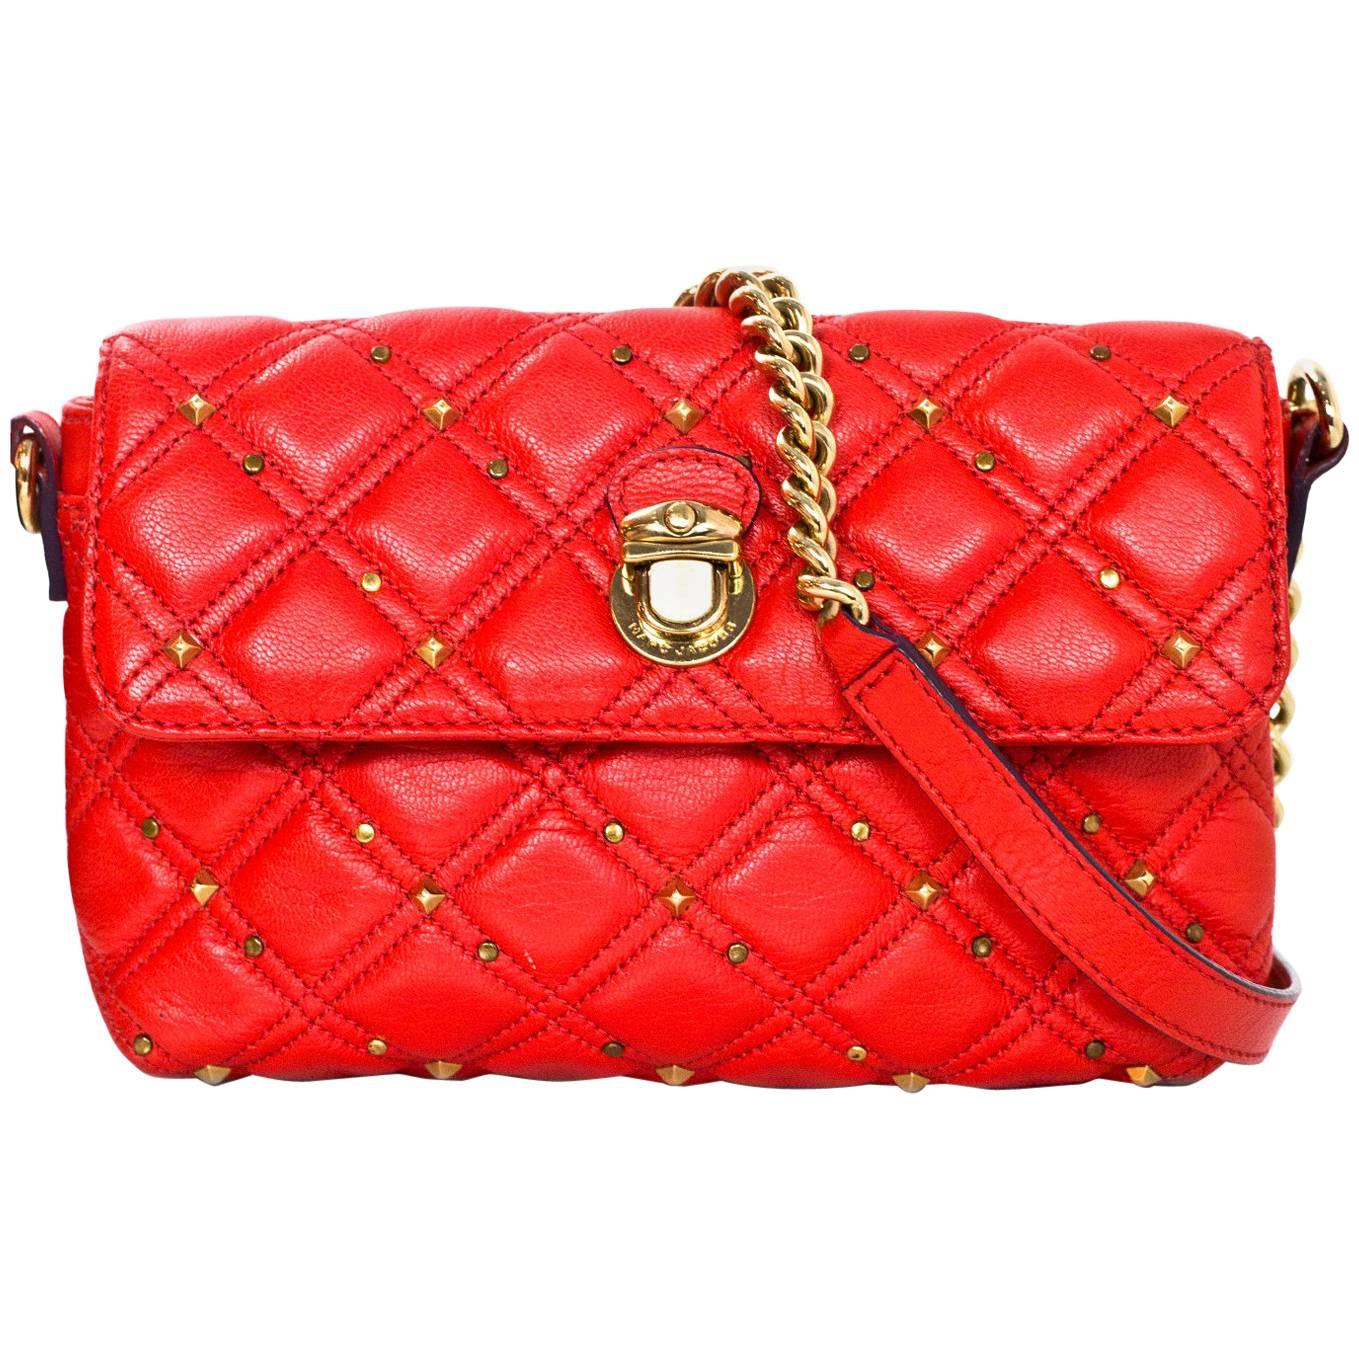 Marc Jacobs Red Leather Studded Crossbody Bag with DB